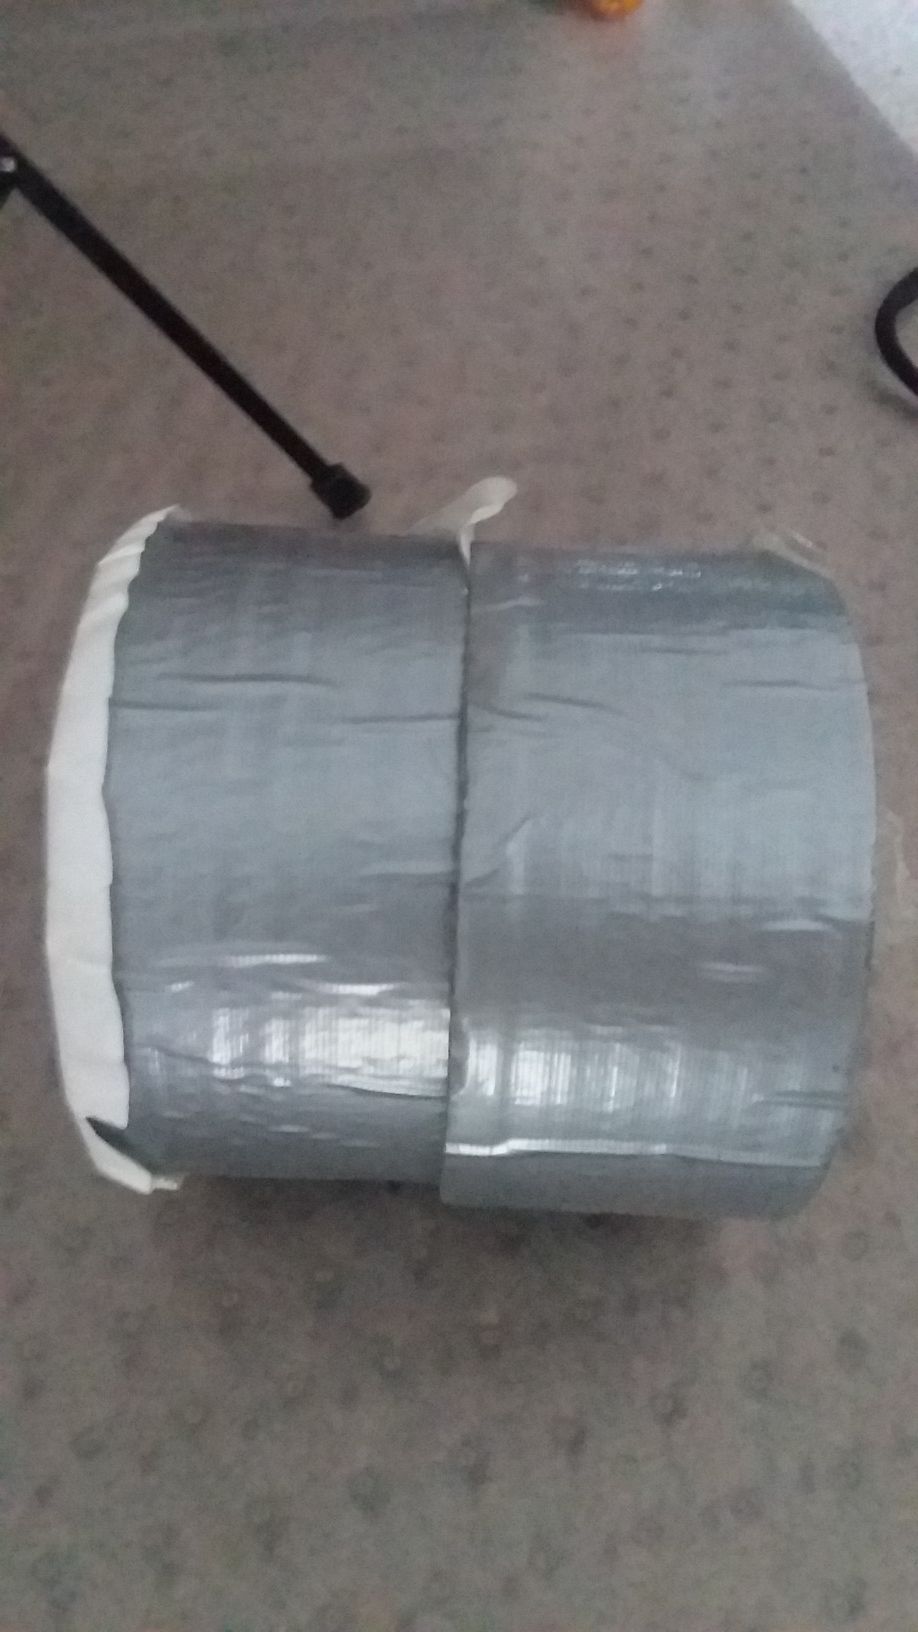 Two thick rolls of duck tape.